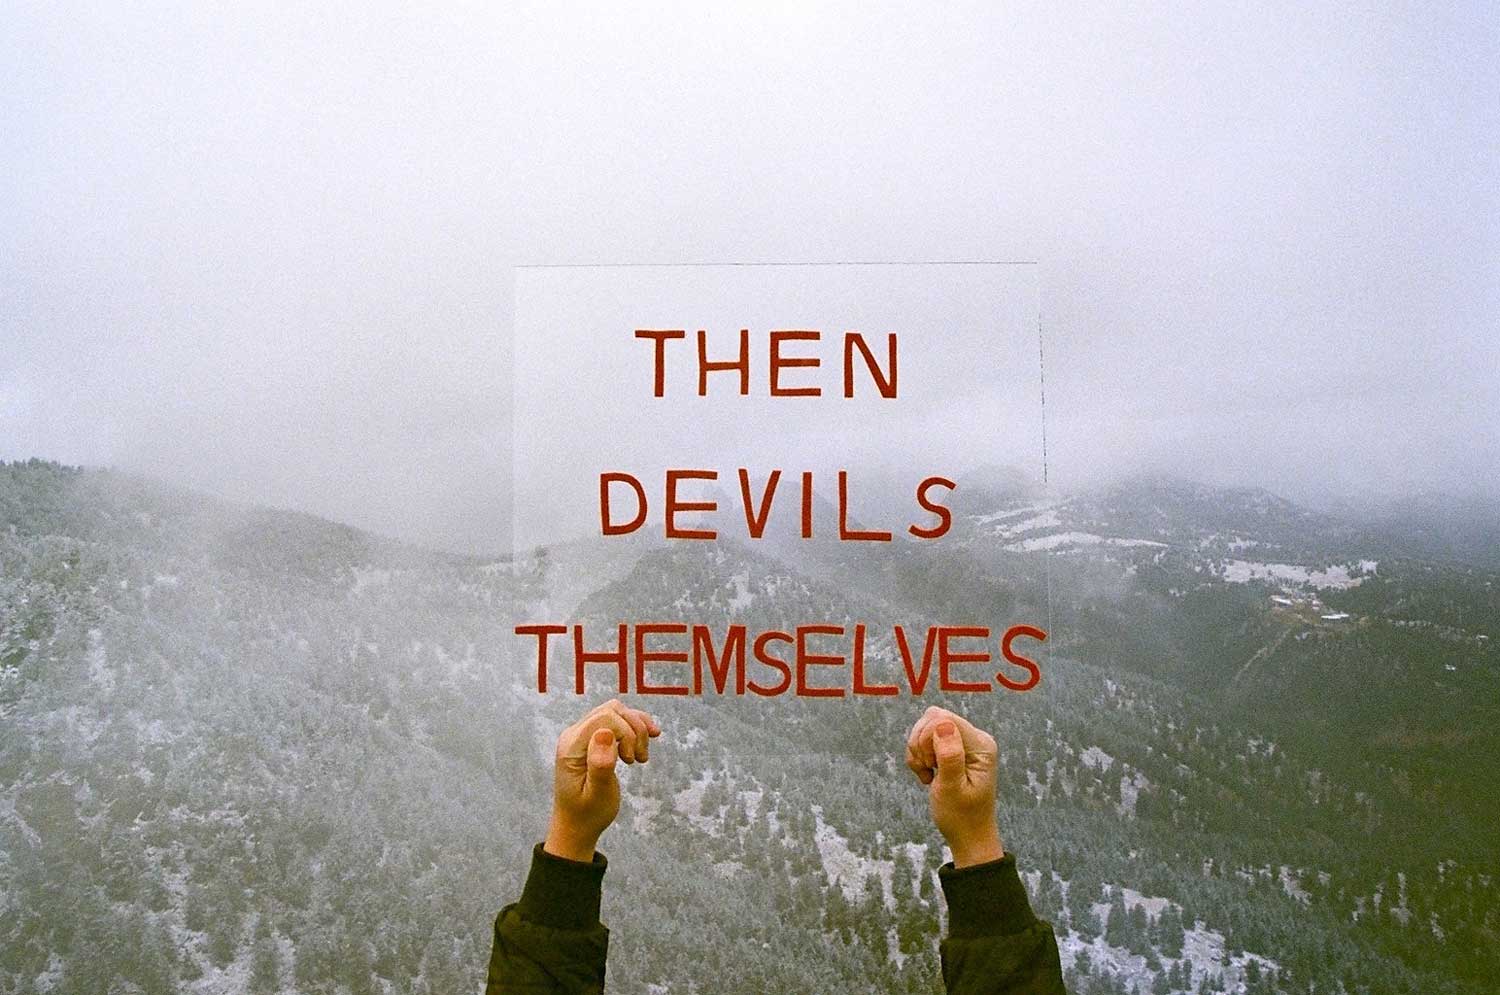 "Then Devils Themselves"